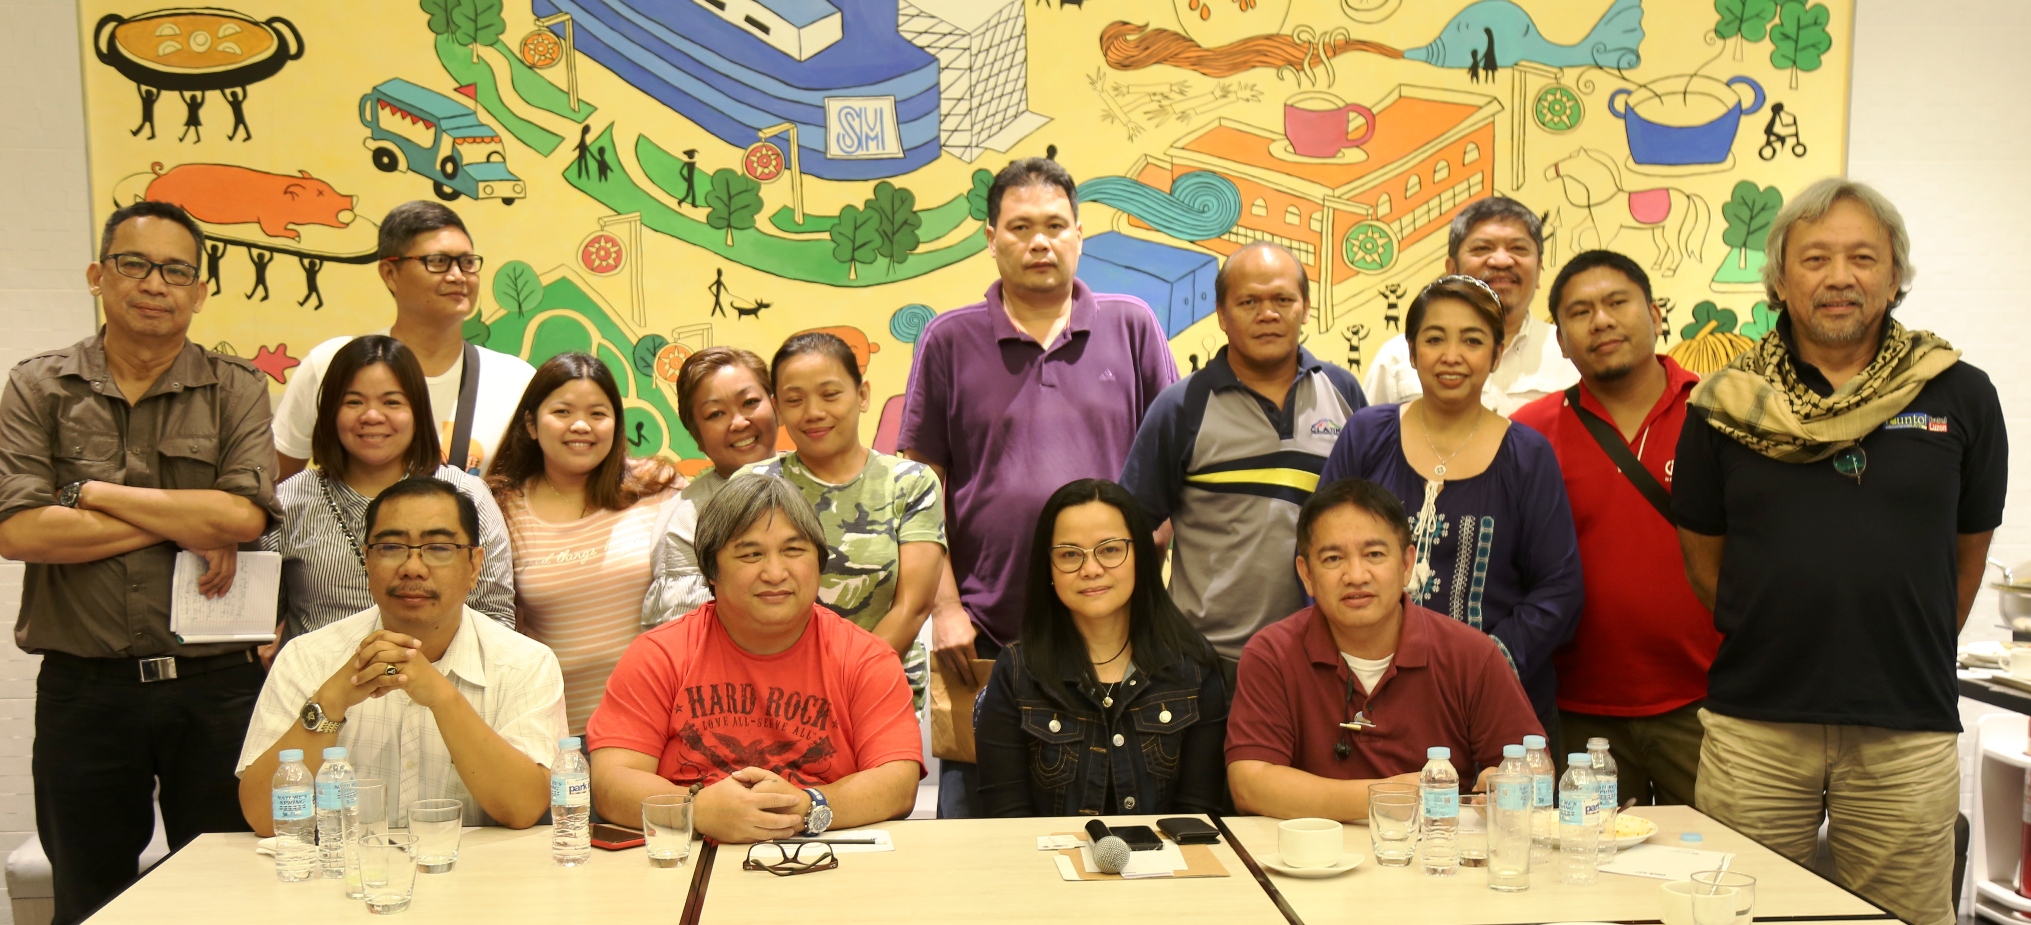 SBMA Chairman and Administrator Wilma T. Eisma poses with members of the Pampanga Press Club after guesting at the â€œNews@Huesâ€ press conference hosted by PPC at the Park Inn by Radisson Clark.